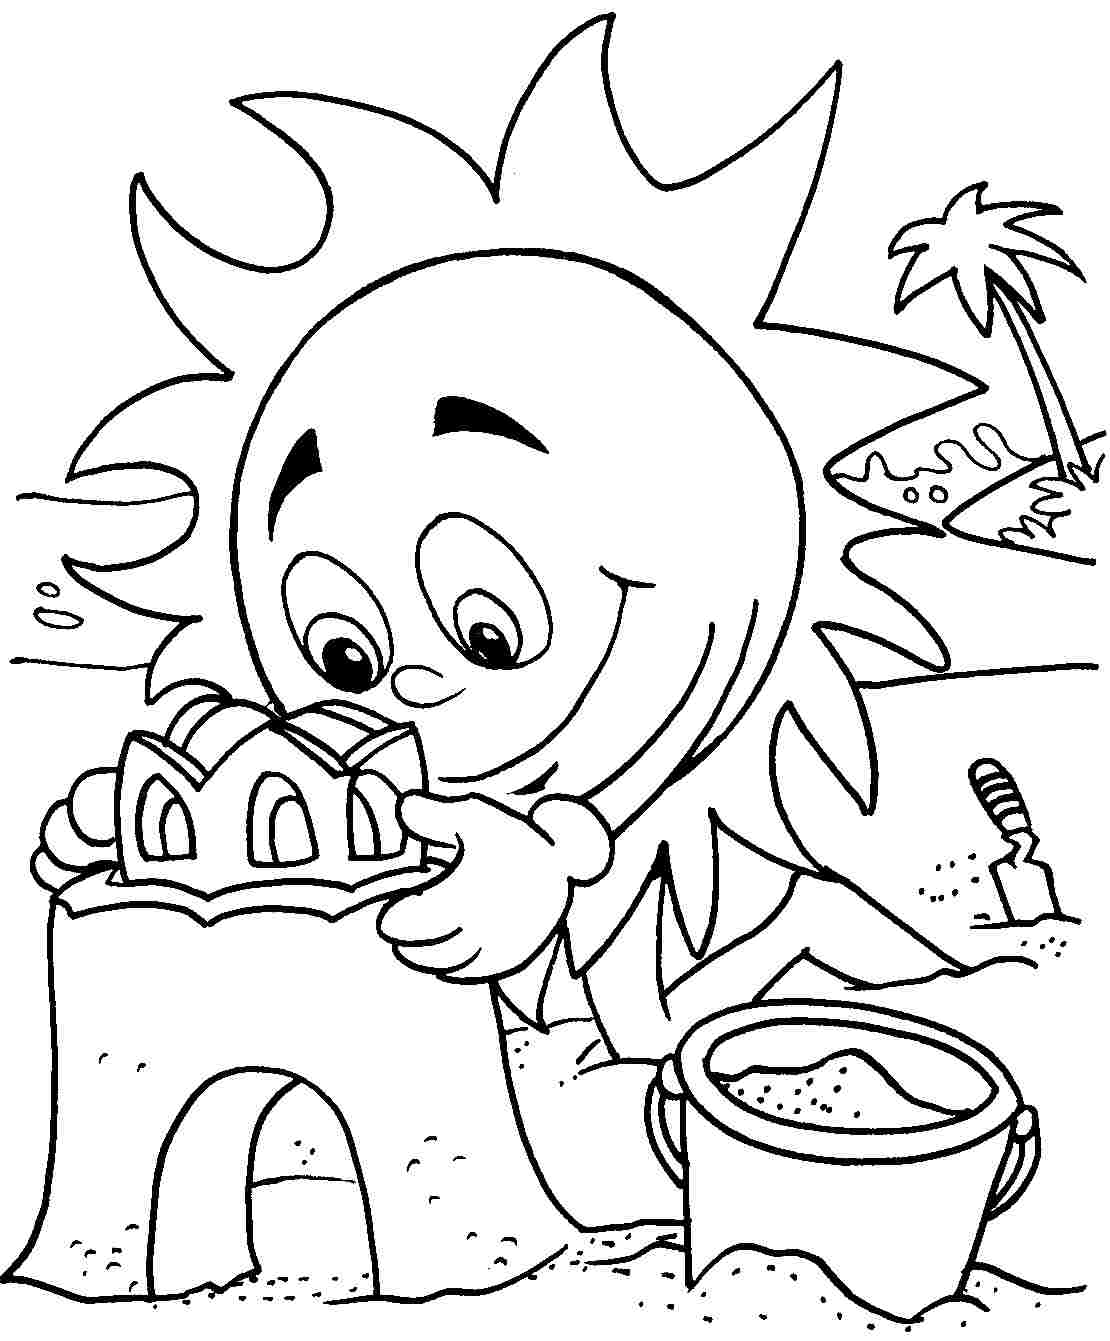 Free Printable Summer Coloring Pages For Kids At Getdrawings | Free